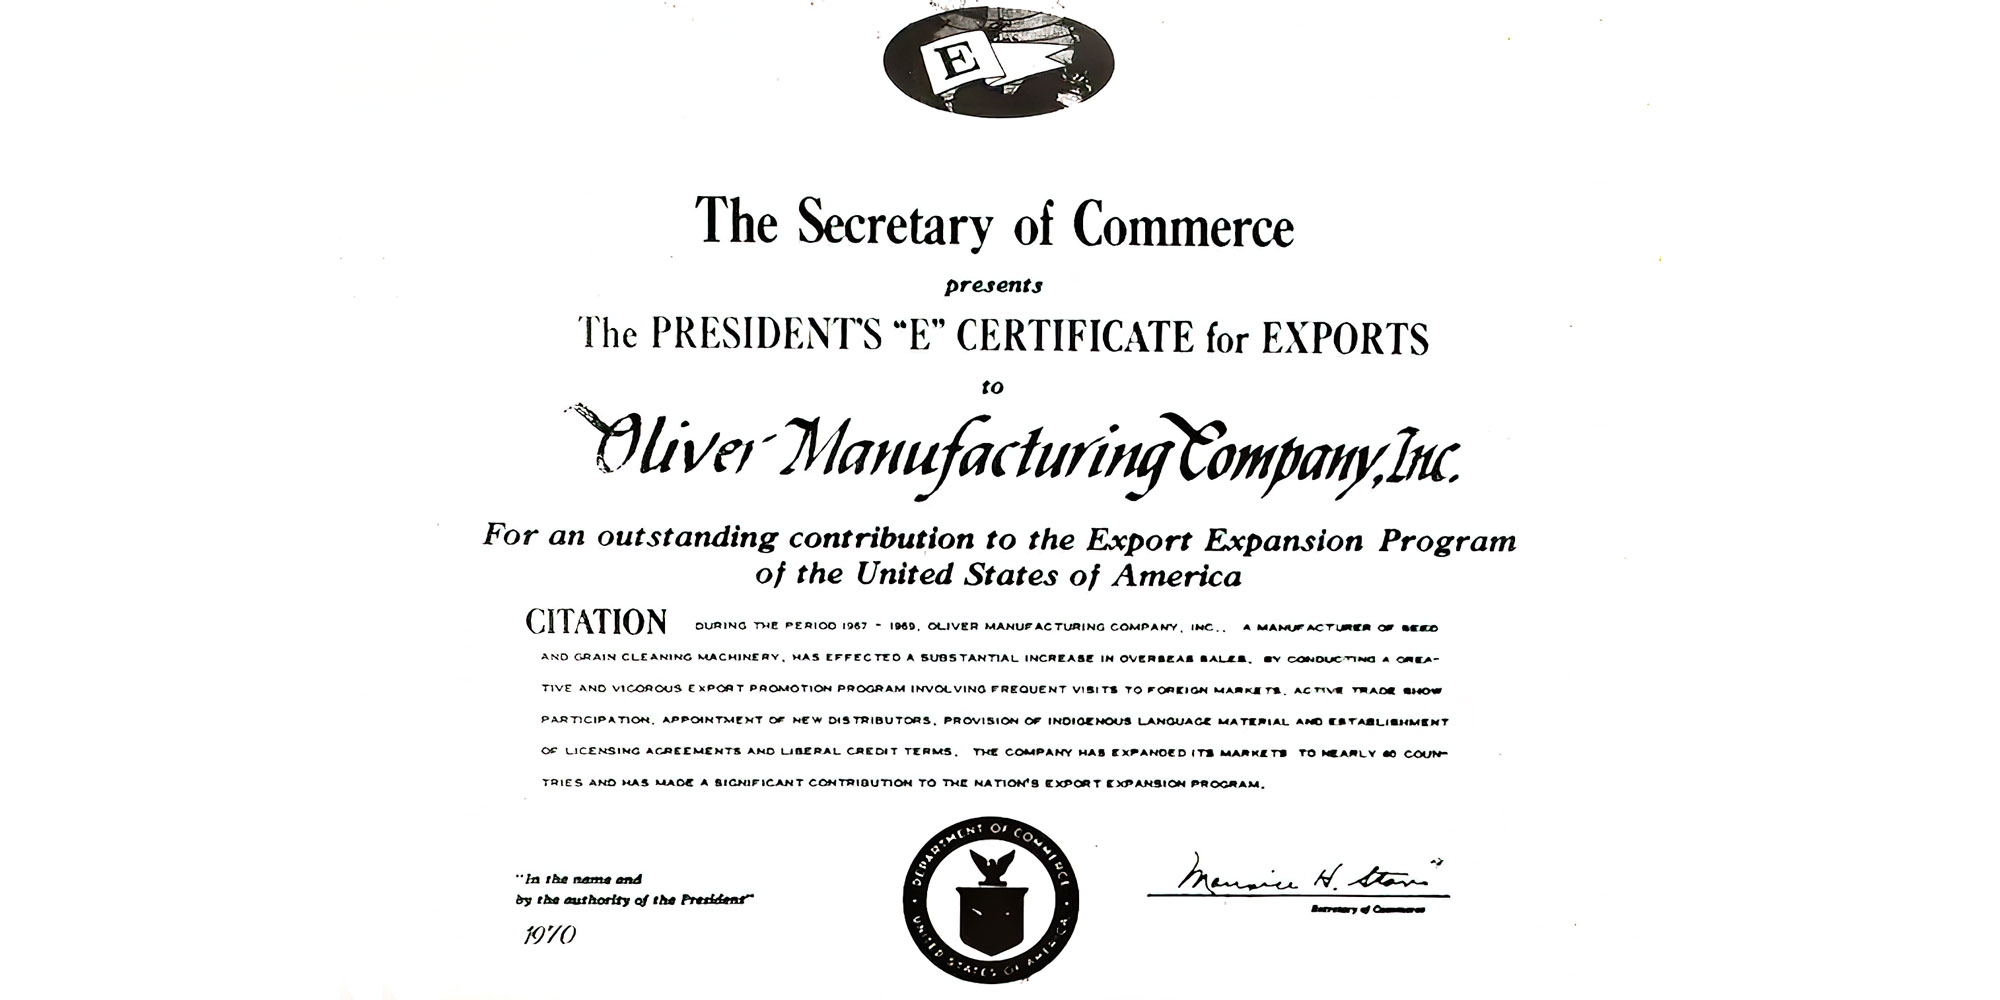 Certificate from the Secretary of Commerce to allow export of Oliver products